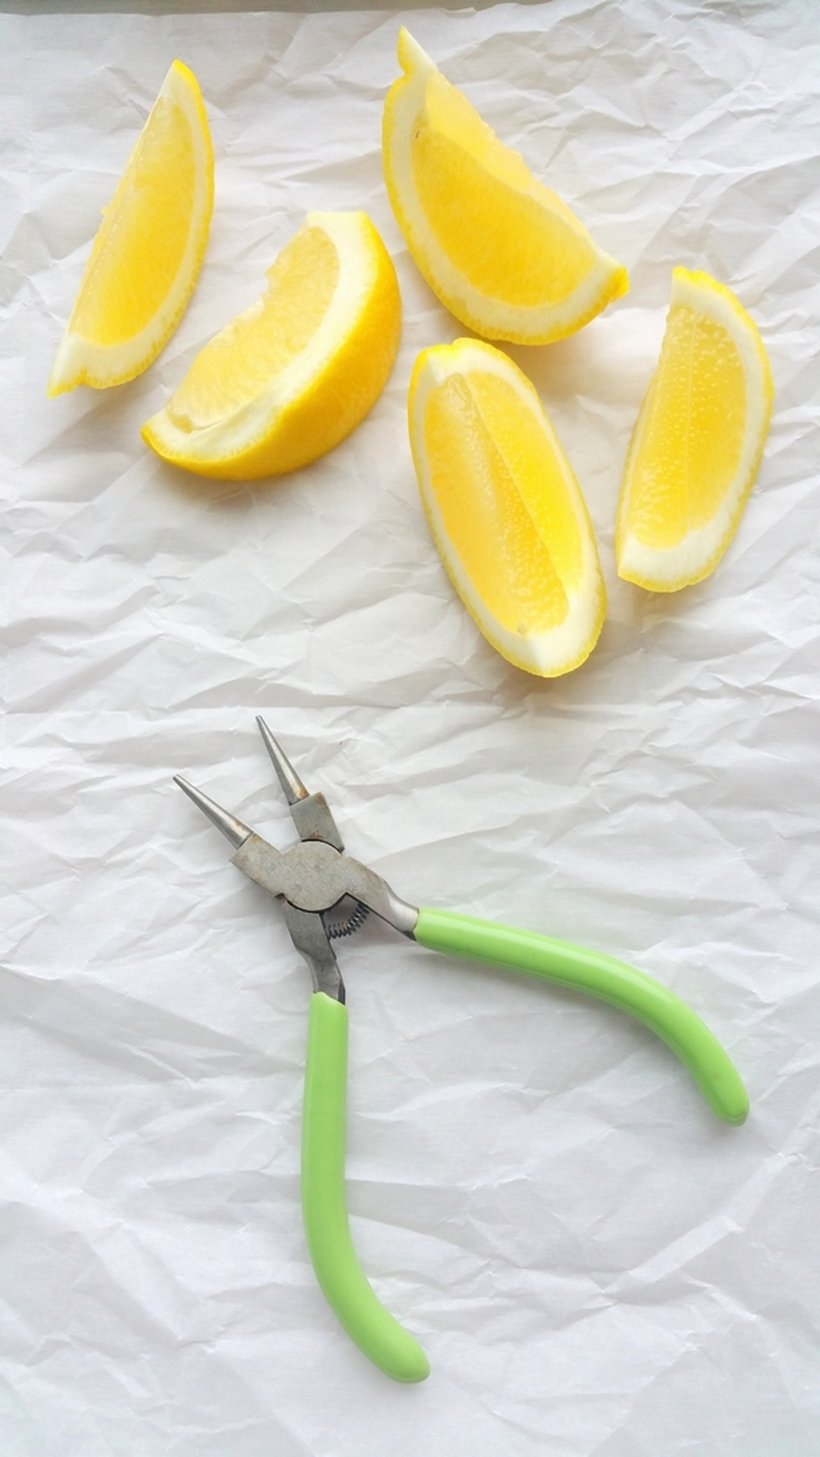 Sliced lemons with a pair of needle nose pliers.